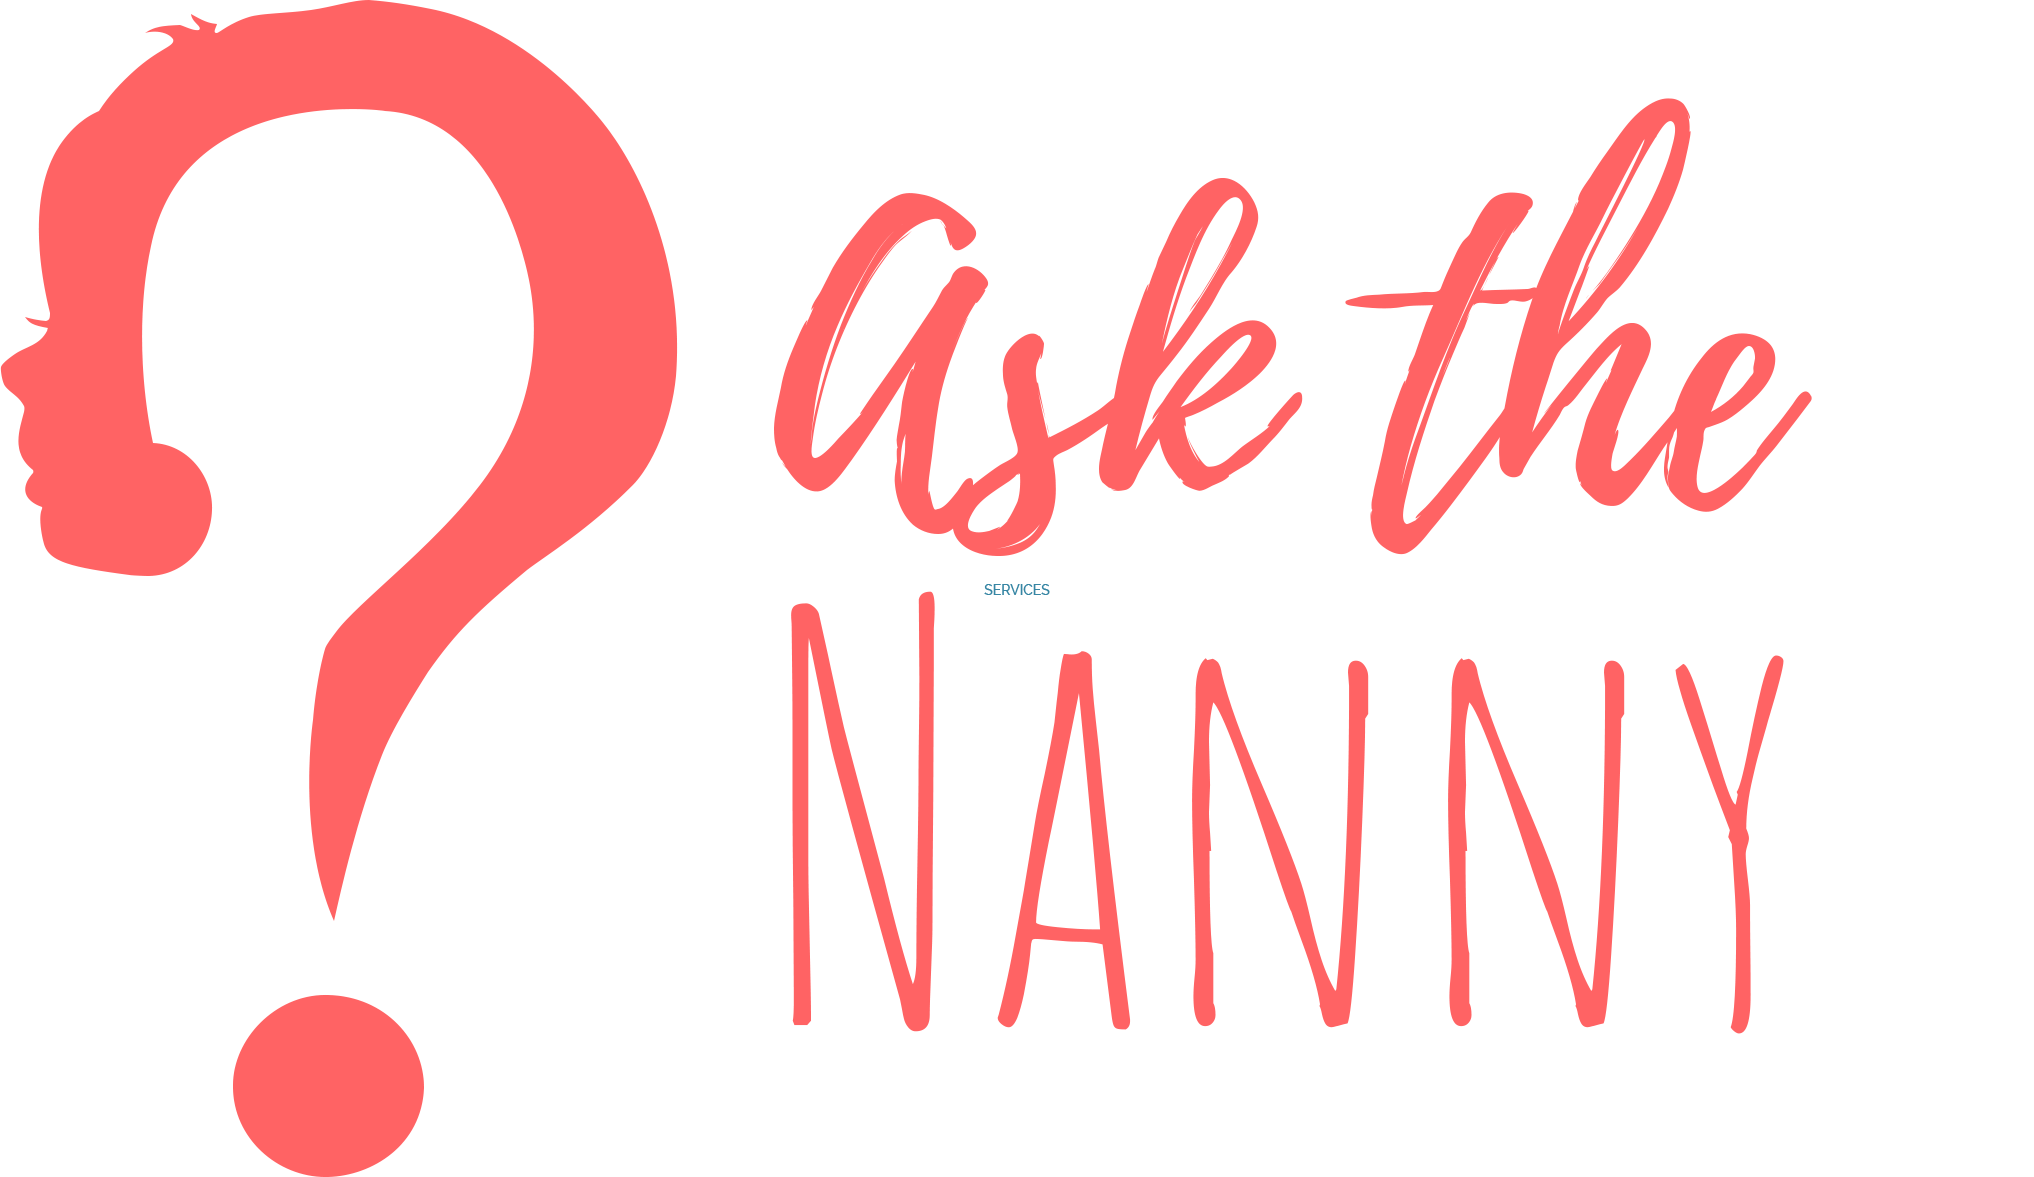 Ask The Nanny